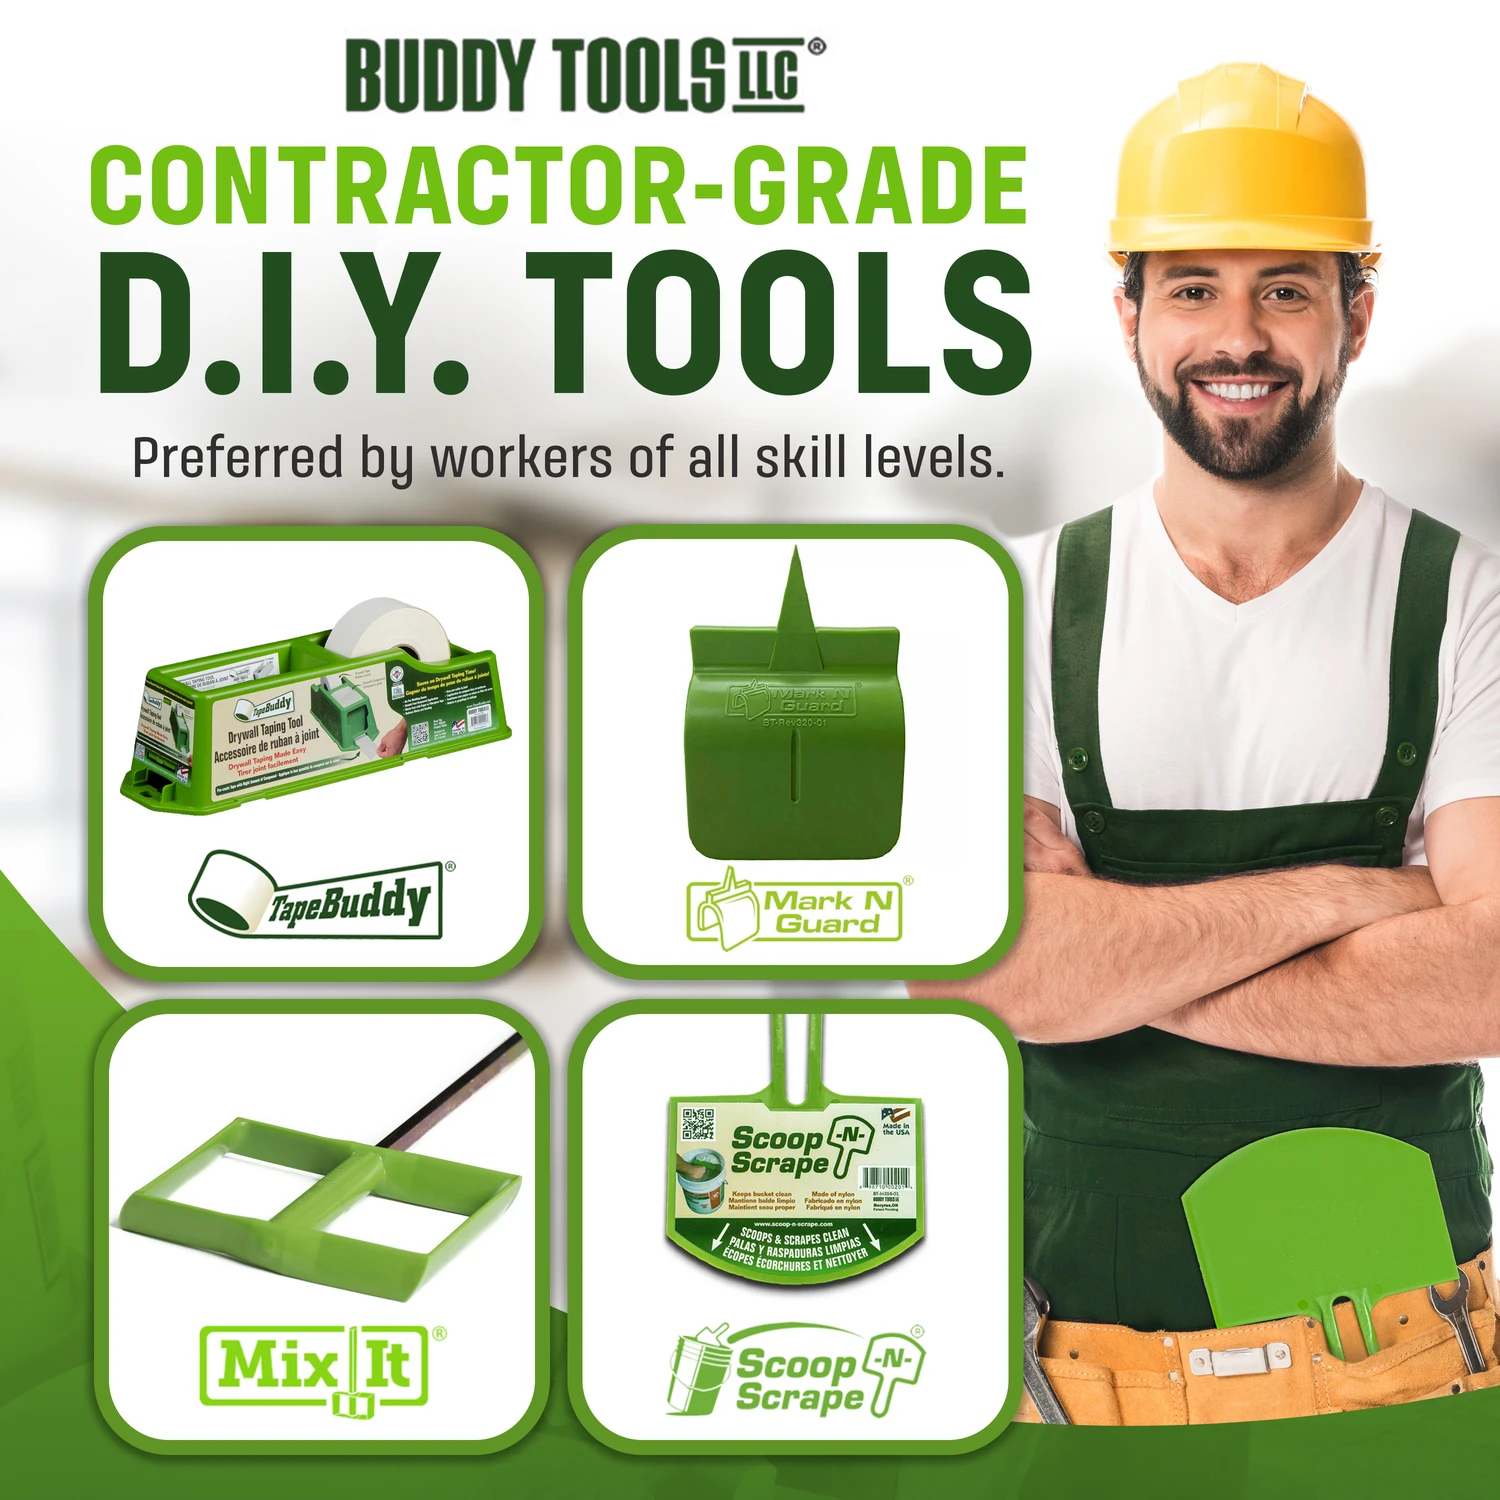 Buddy Tools 6 in 1 Drywall Set Includes Drywall Taper, Taping Knife, Mud  Mixer, Outlet Locator and Bucket Scraper 